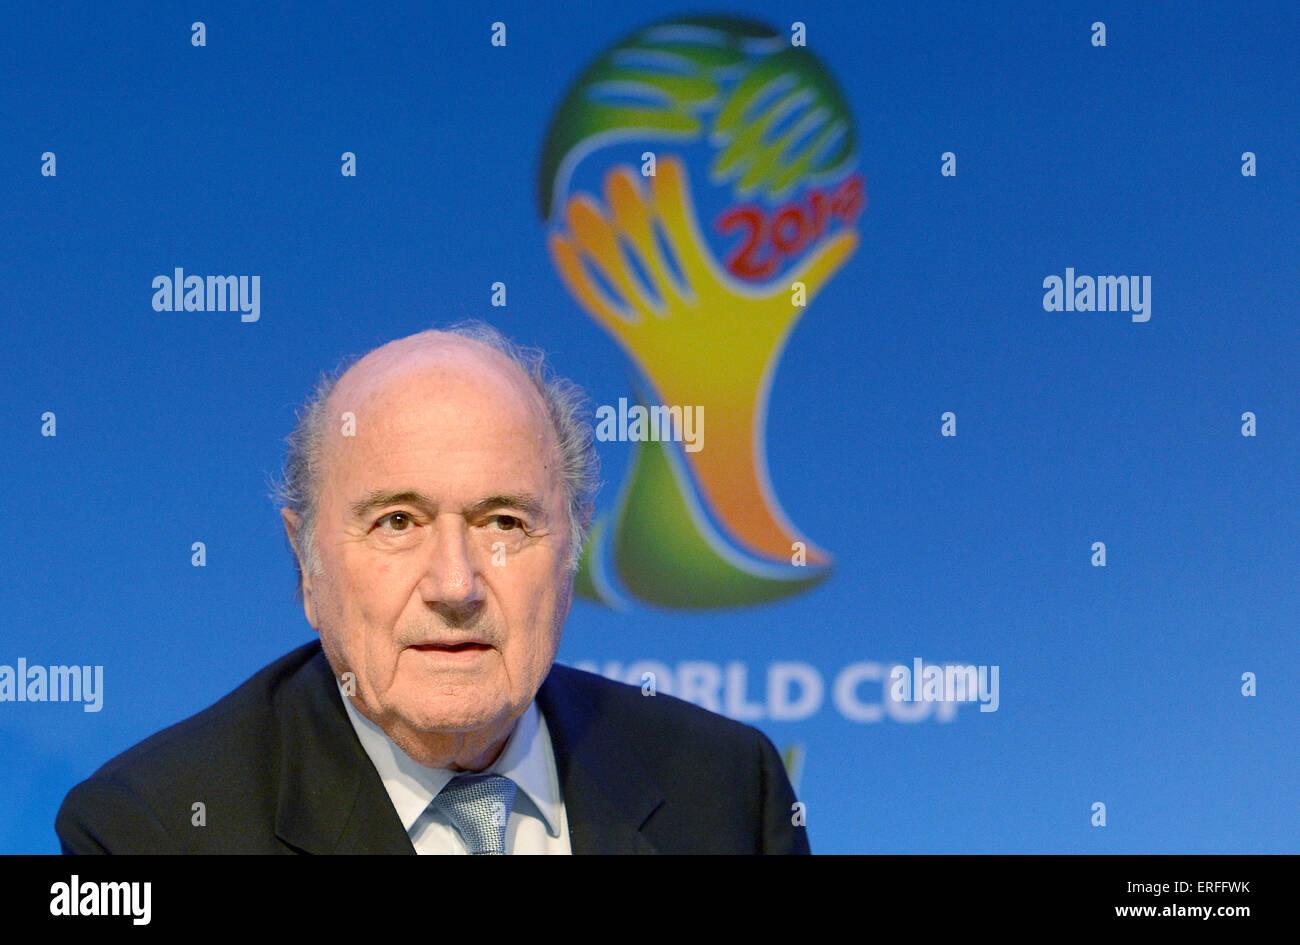 FIFA president Joseph Blatter attends a press conference after the meeting of the Organising Committee for the FIFA World Cup 2014 in Costa do Sauipe, Brazil, 03 December 2013. The final draw for the preliminary round groups of the 2014 FIFA world cup Brazil will be held on 06 December 2013. Photo: Marcus Brandt/dpa Stock Photo